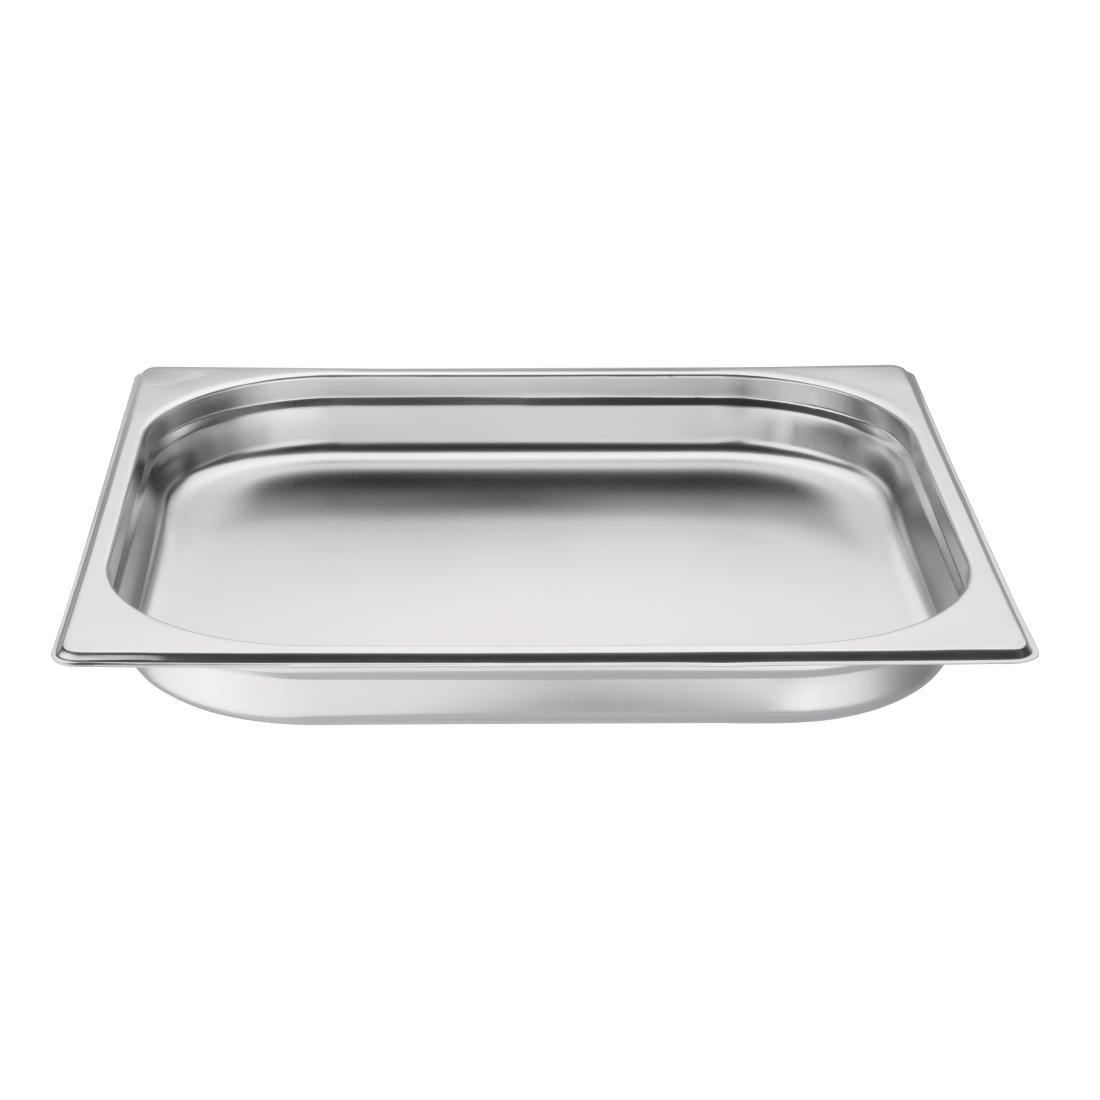 Vogue Stainless Steel Gastronorm 2/3 Pan 20mm - GM314  - 2